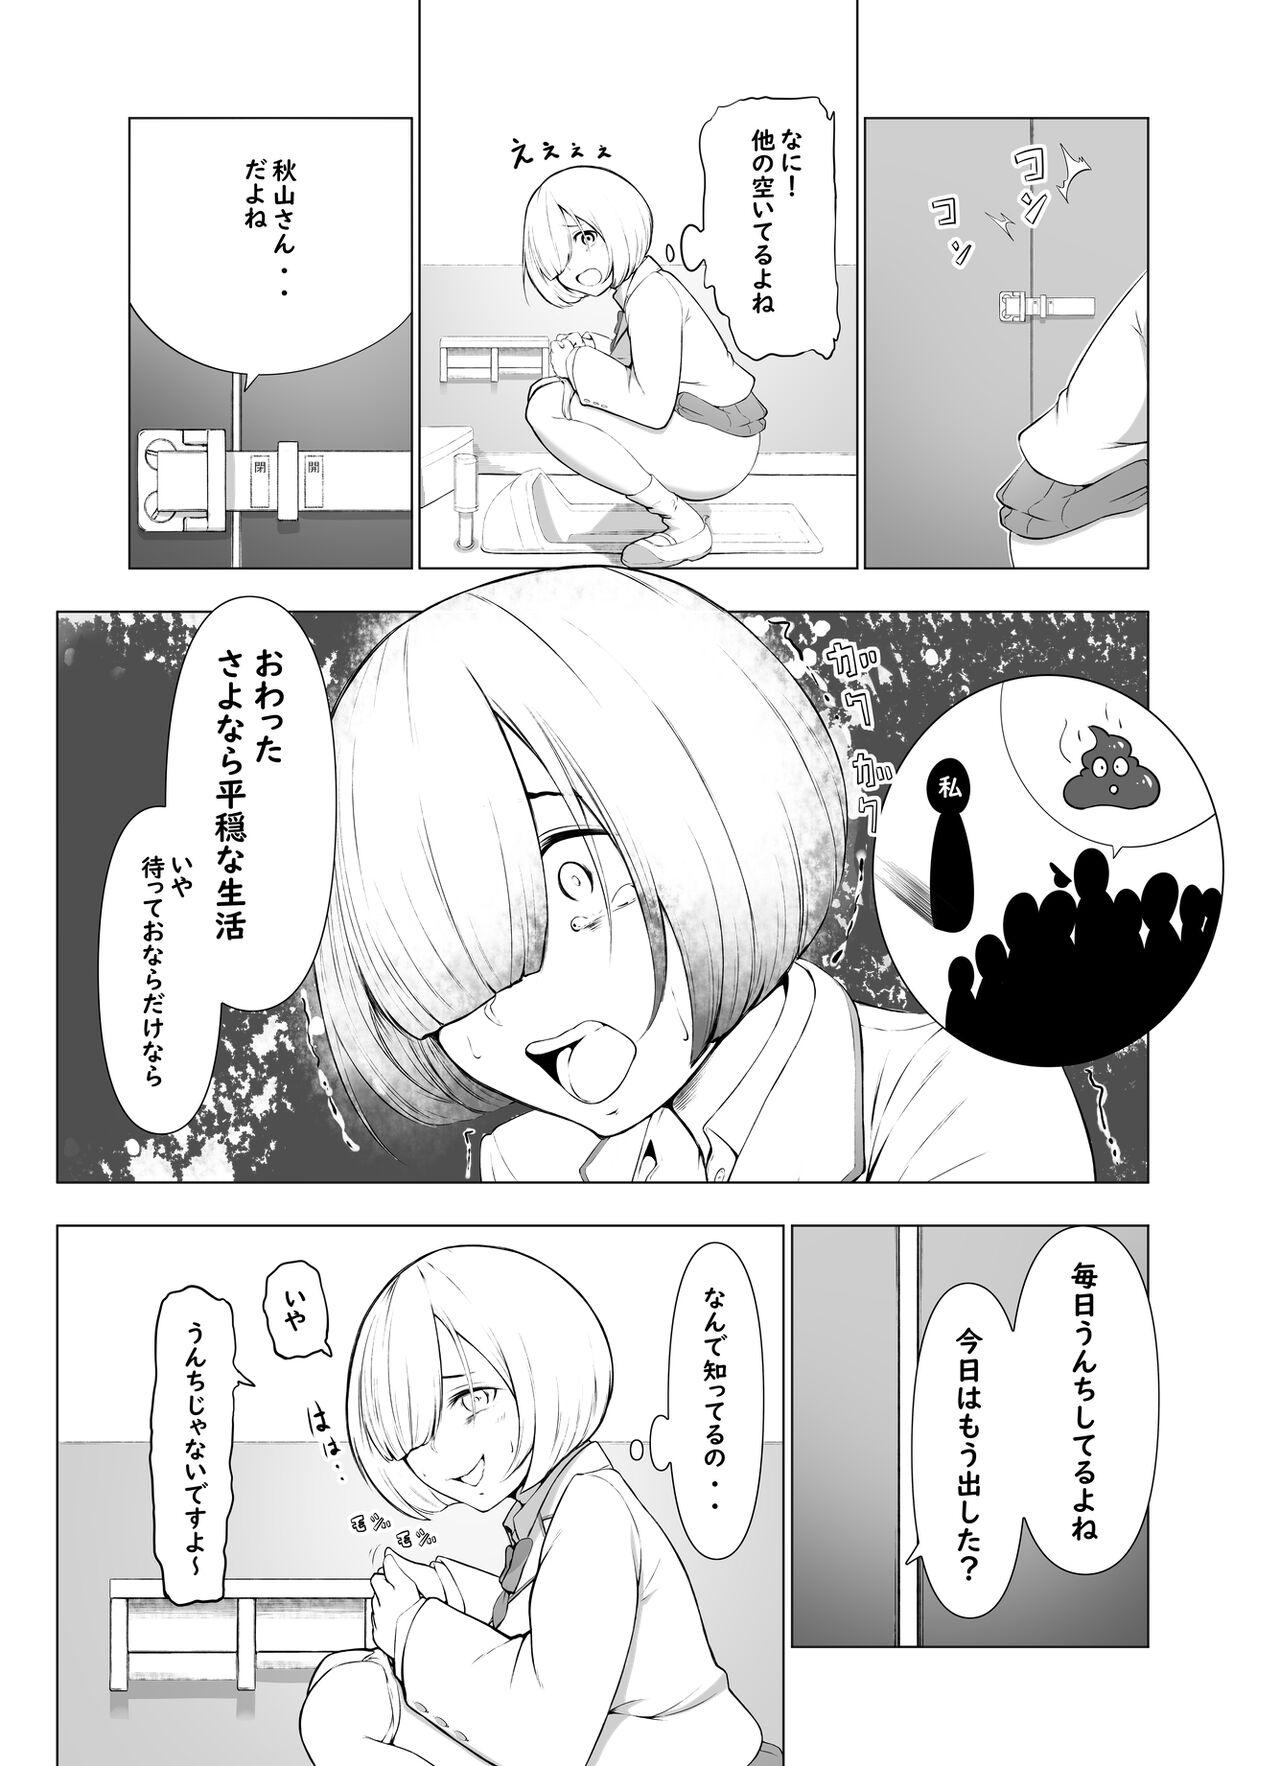 Butt 【脱糞漫画】トイレの音【８P】 Cumfacial - Page 4